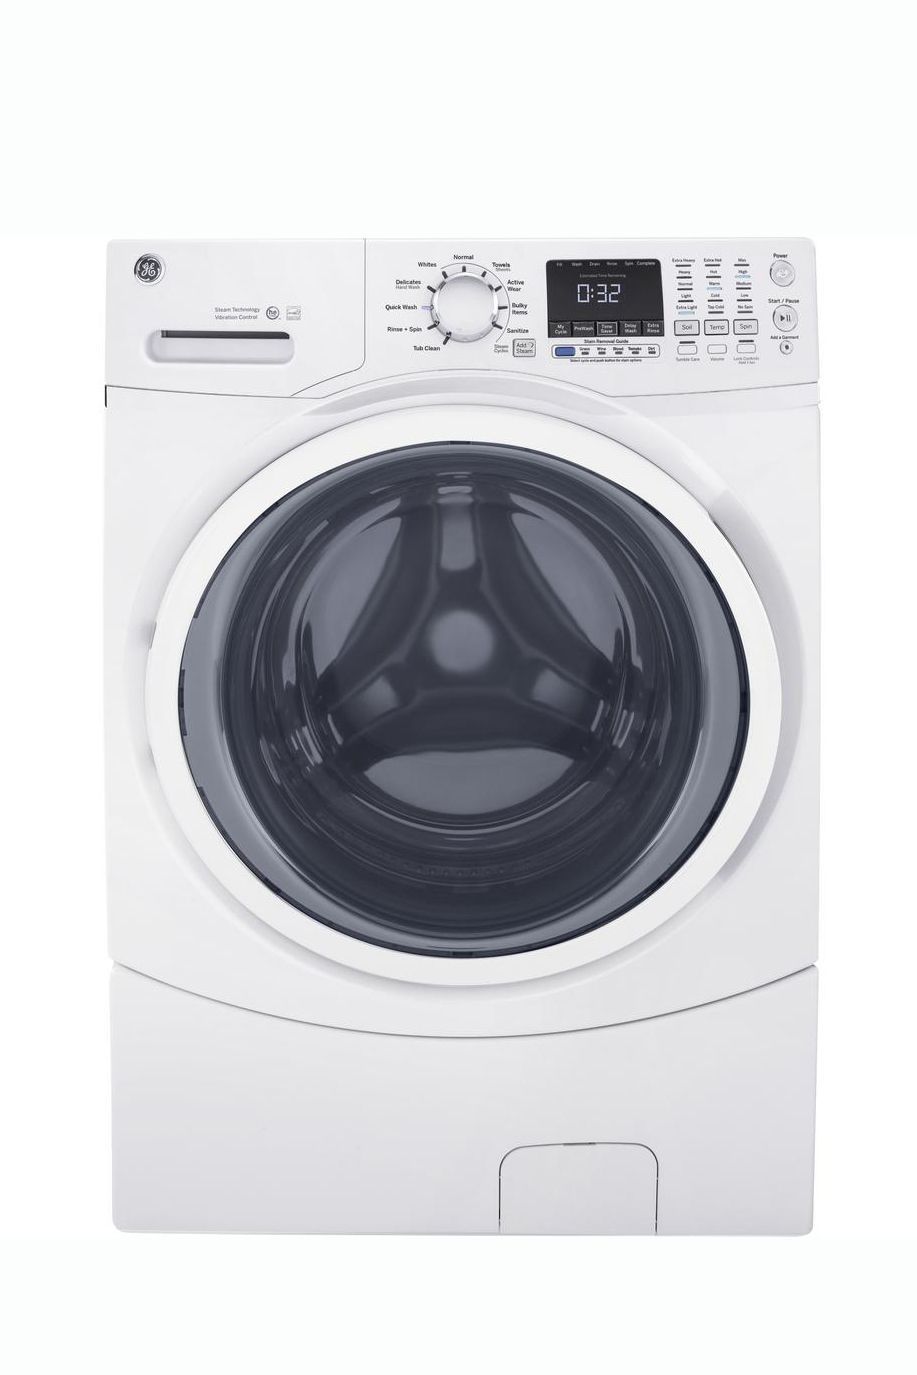 Home Depot Memorial Day Sale Washer Appliance 1527089843 ?crop=1xw 1xh;center,top&resize=980 *